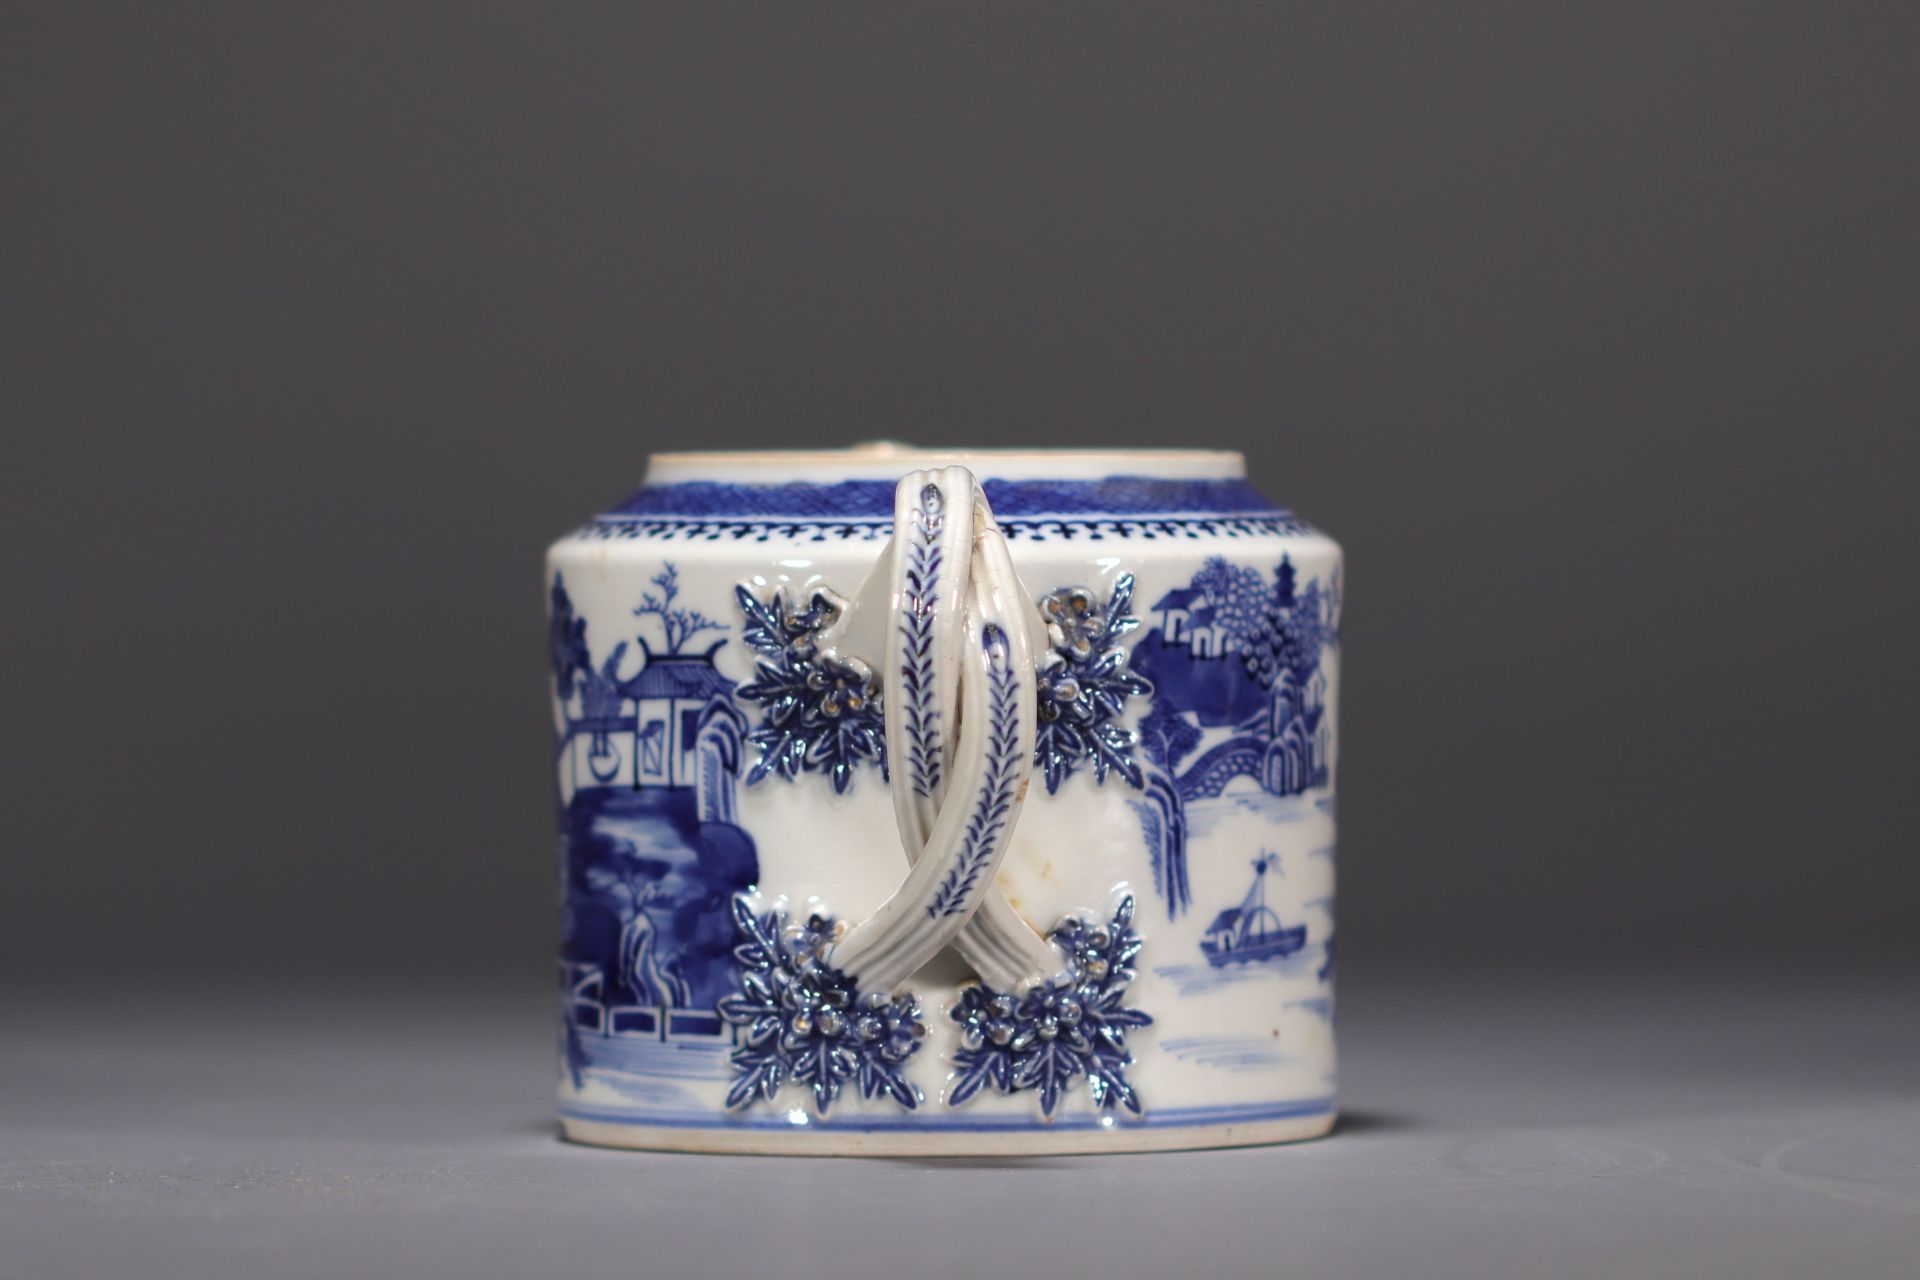 China - A white and blue porcelain teapot decorated with landscapes and a junk, 18th century. - Bild 3 aus 8